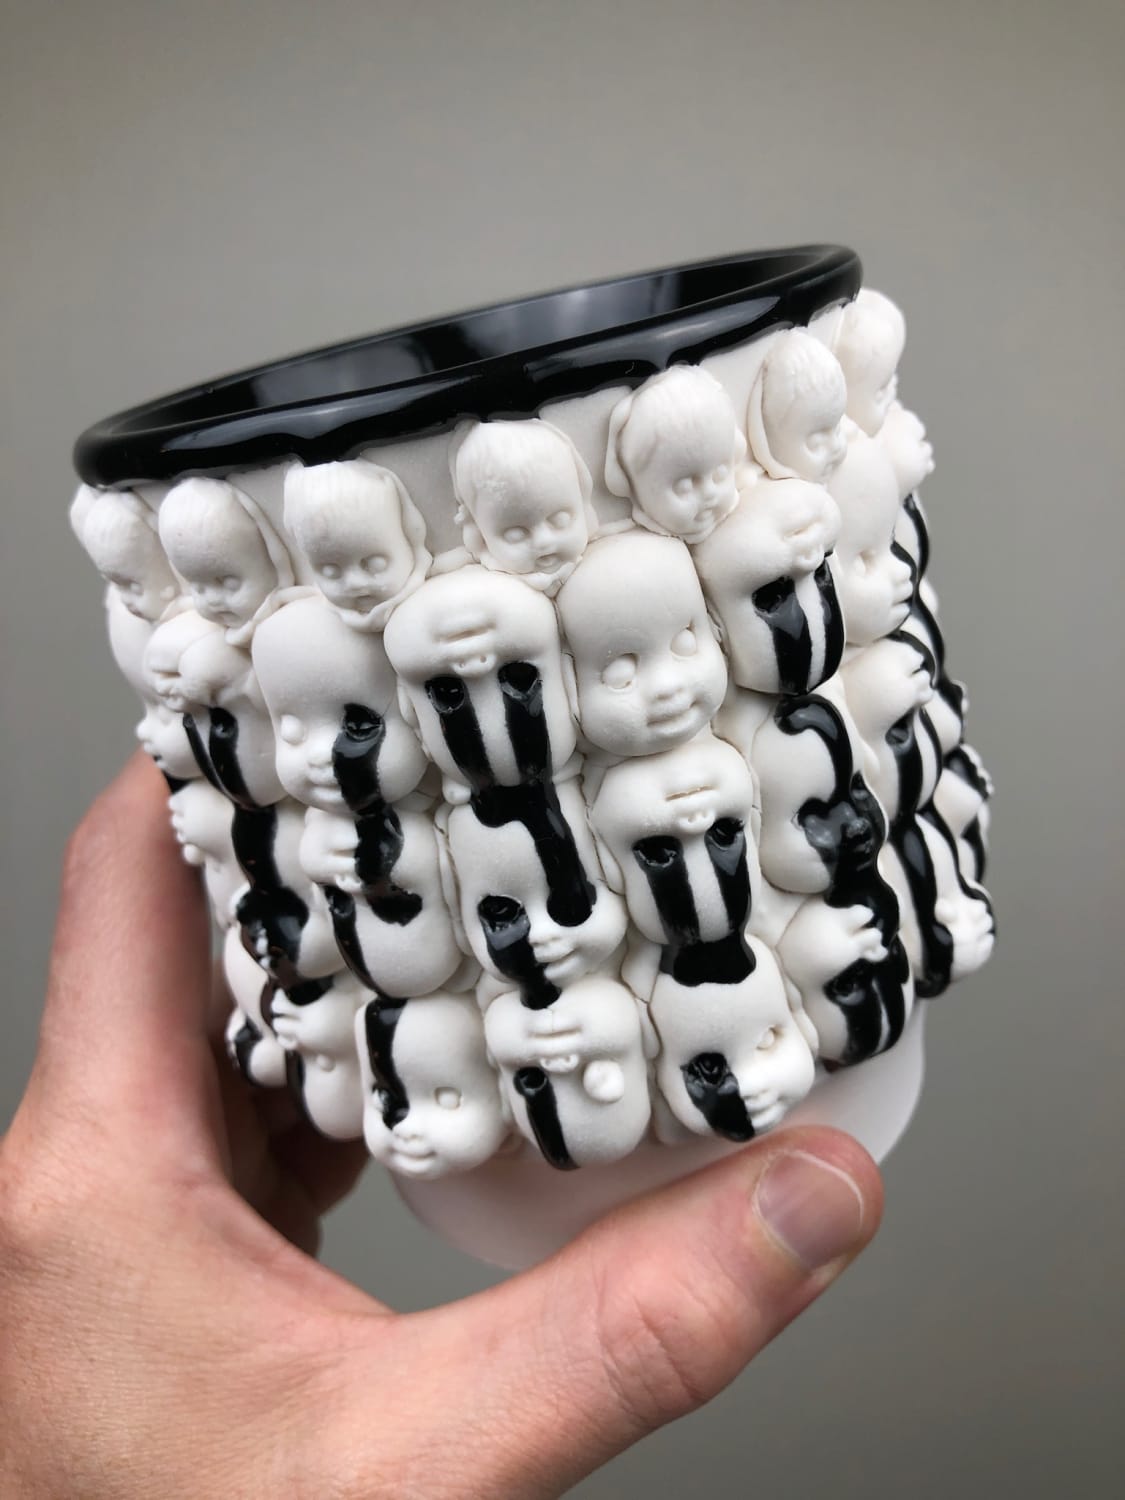 Human Anatomy and Oozing Black Glazes Cover Ceramics by Canopic Studio — Colossal